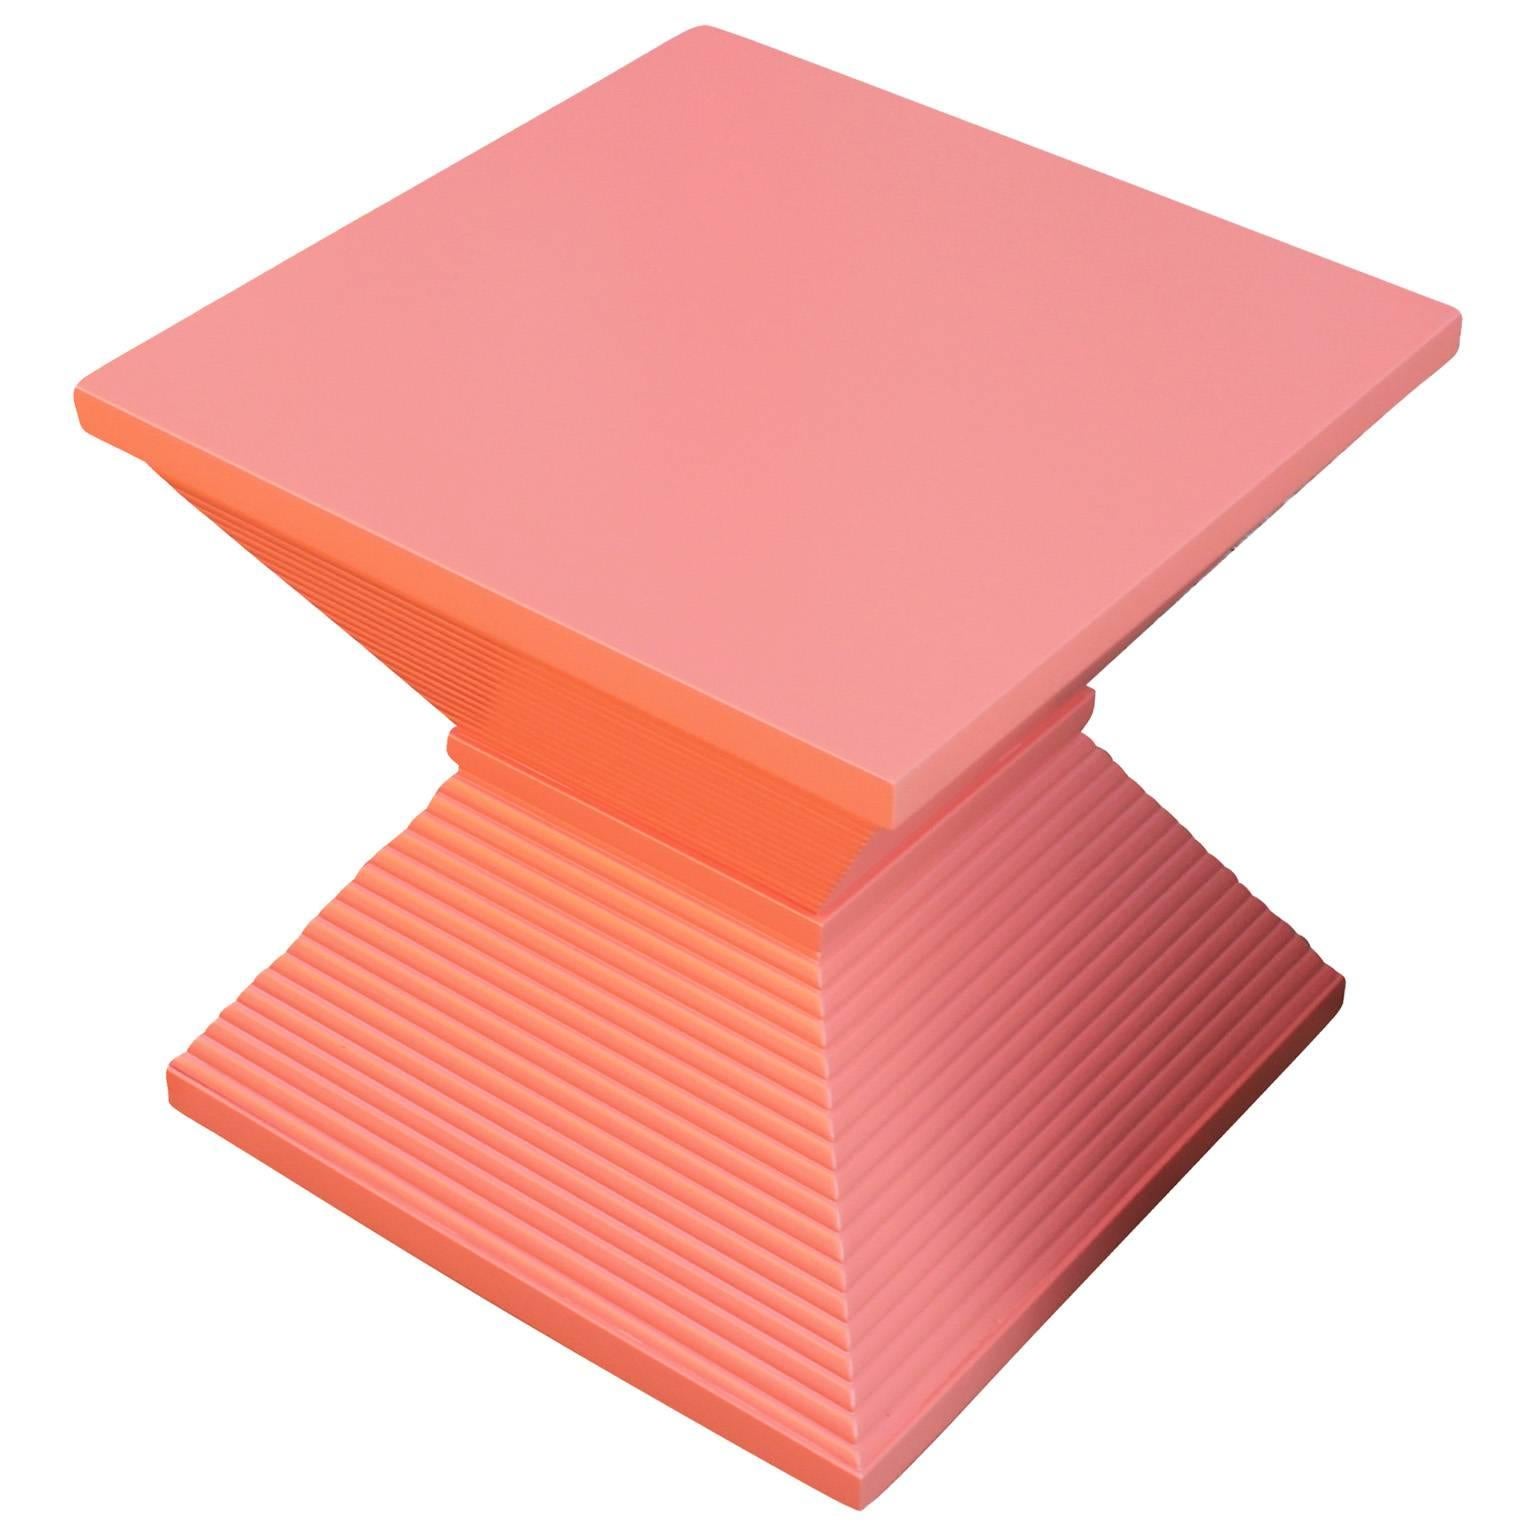 Wonderful pair of side tables. Double pyramid shaped tables are freshly lacquered in coral. Perfect pop of color for any space!